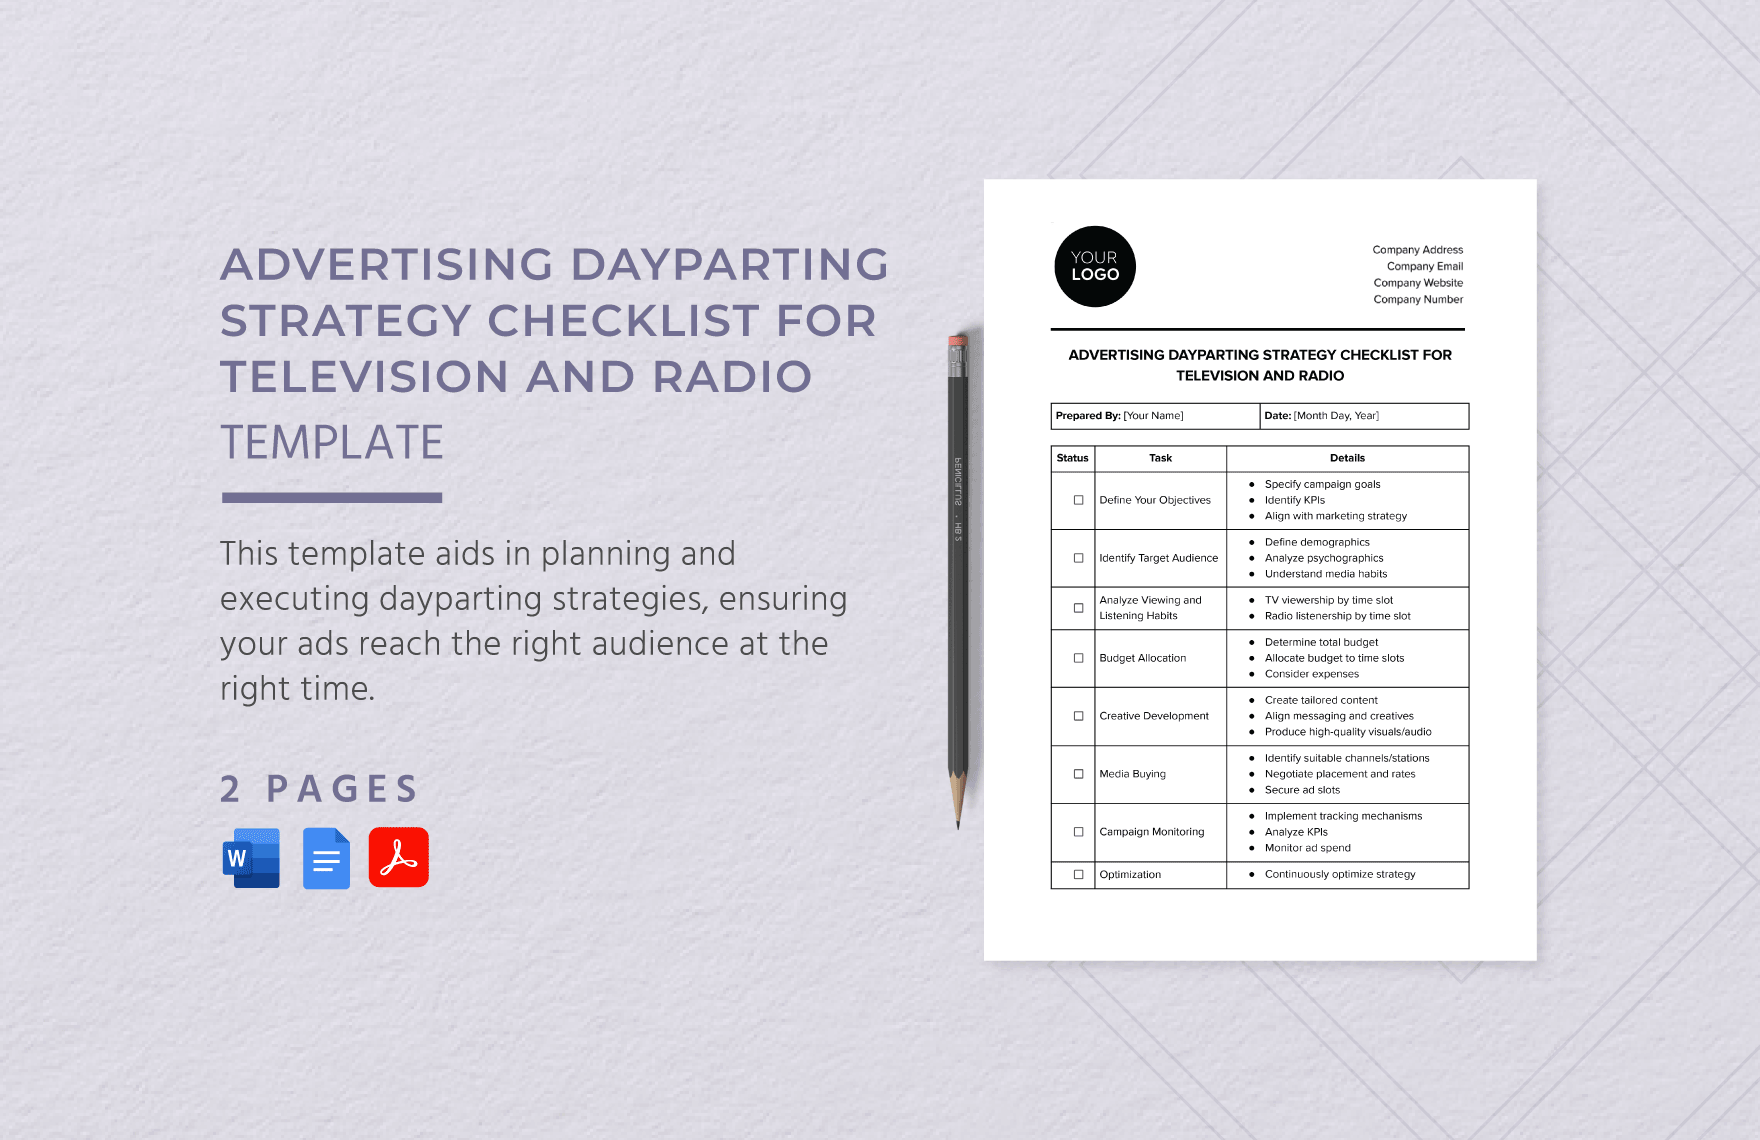 Advertising Dayparting Strategy Checklist for Television and Radio Template in Word, Google Docs, PDF